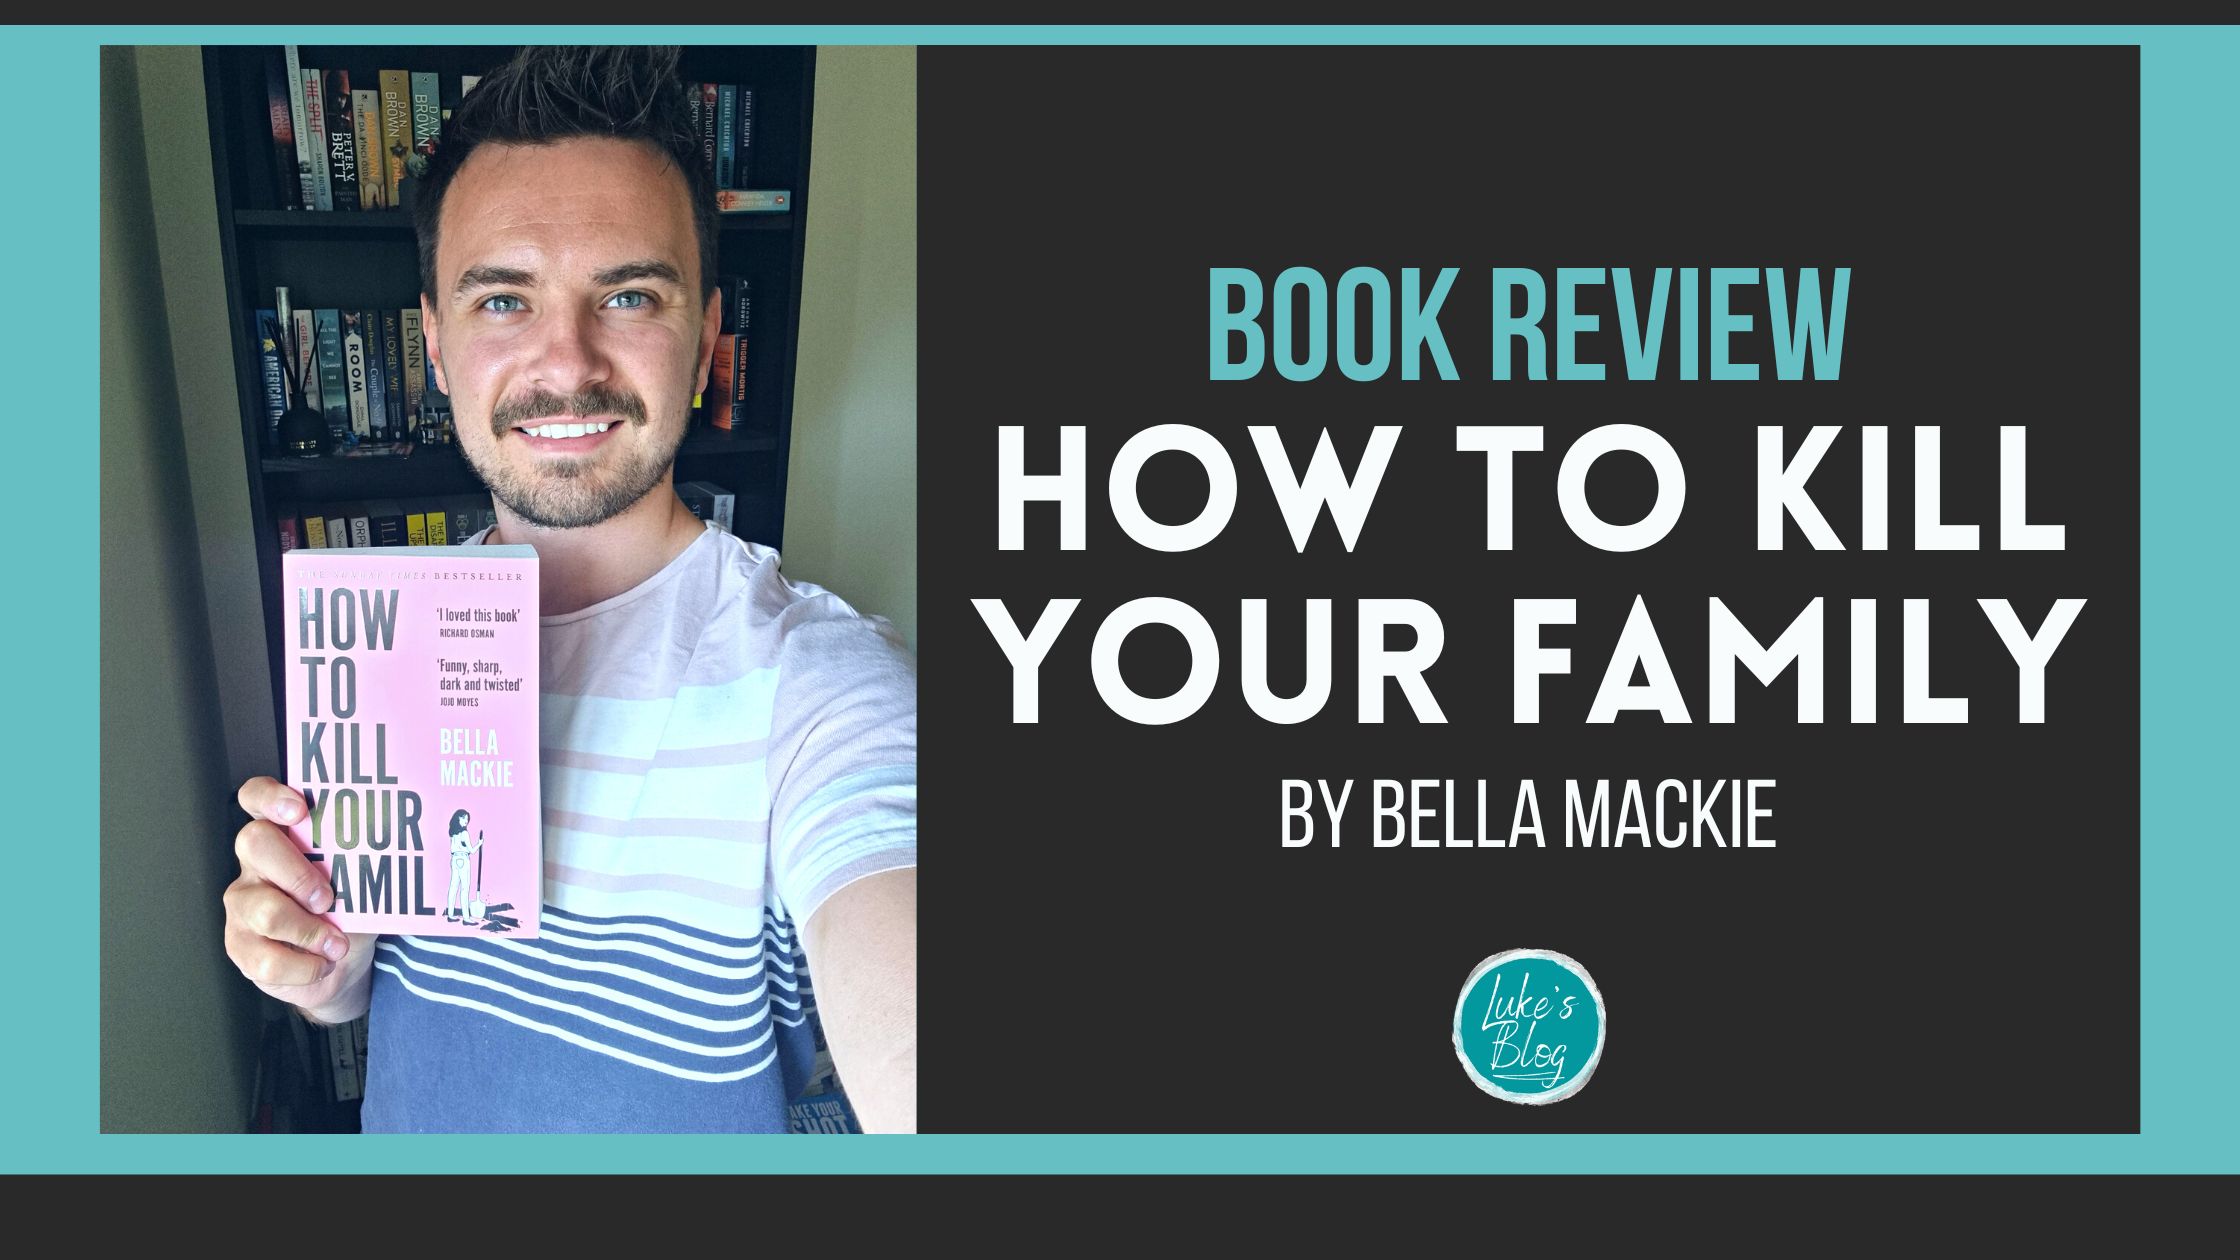 How To Kill Your Family by Bella Mackie book review Luke's Blog